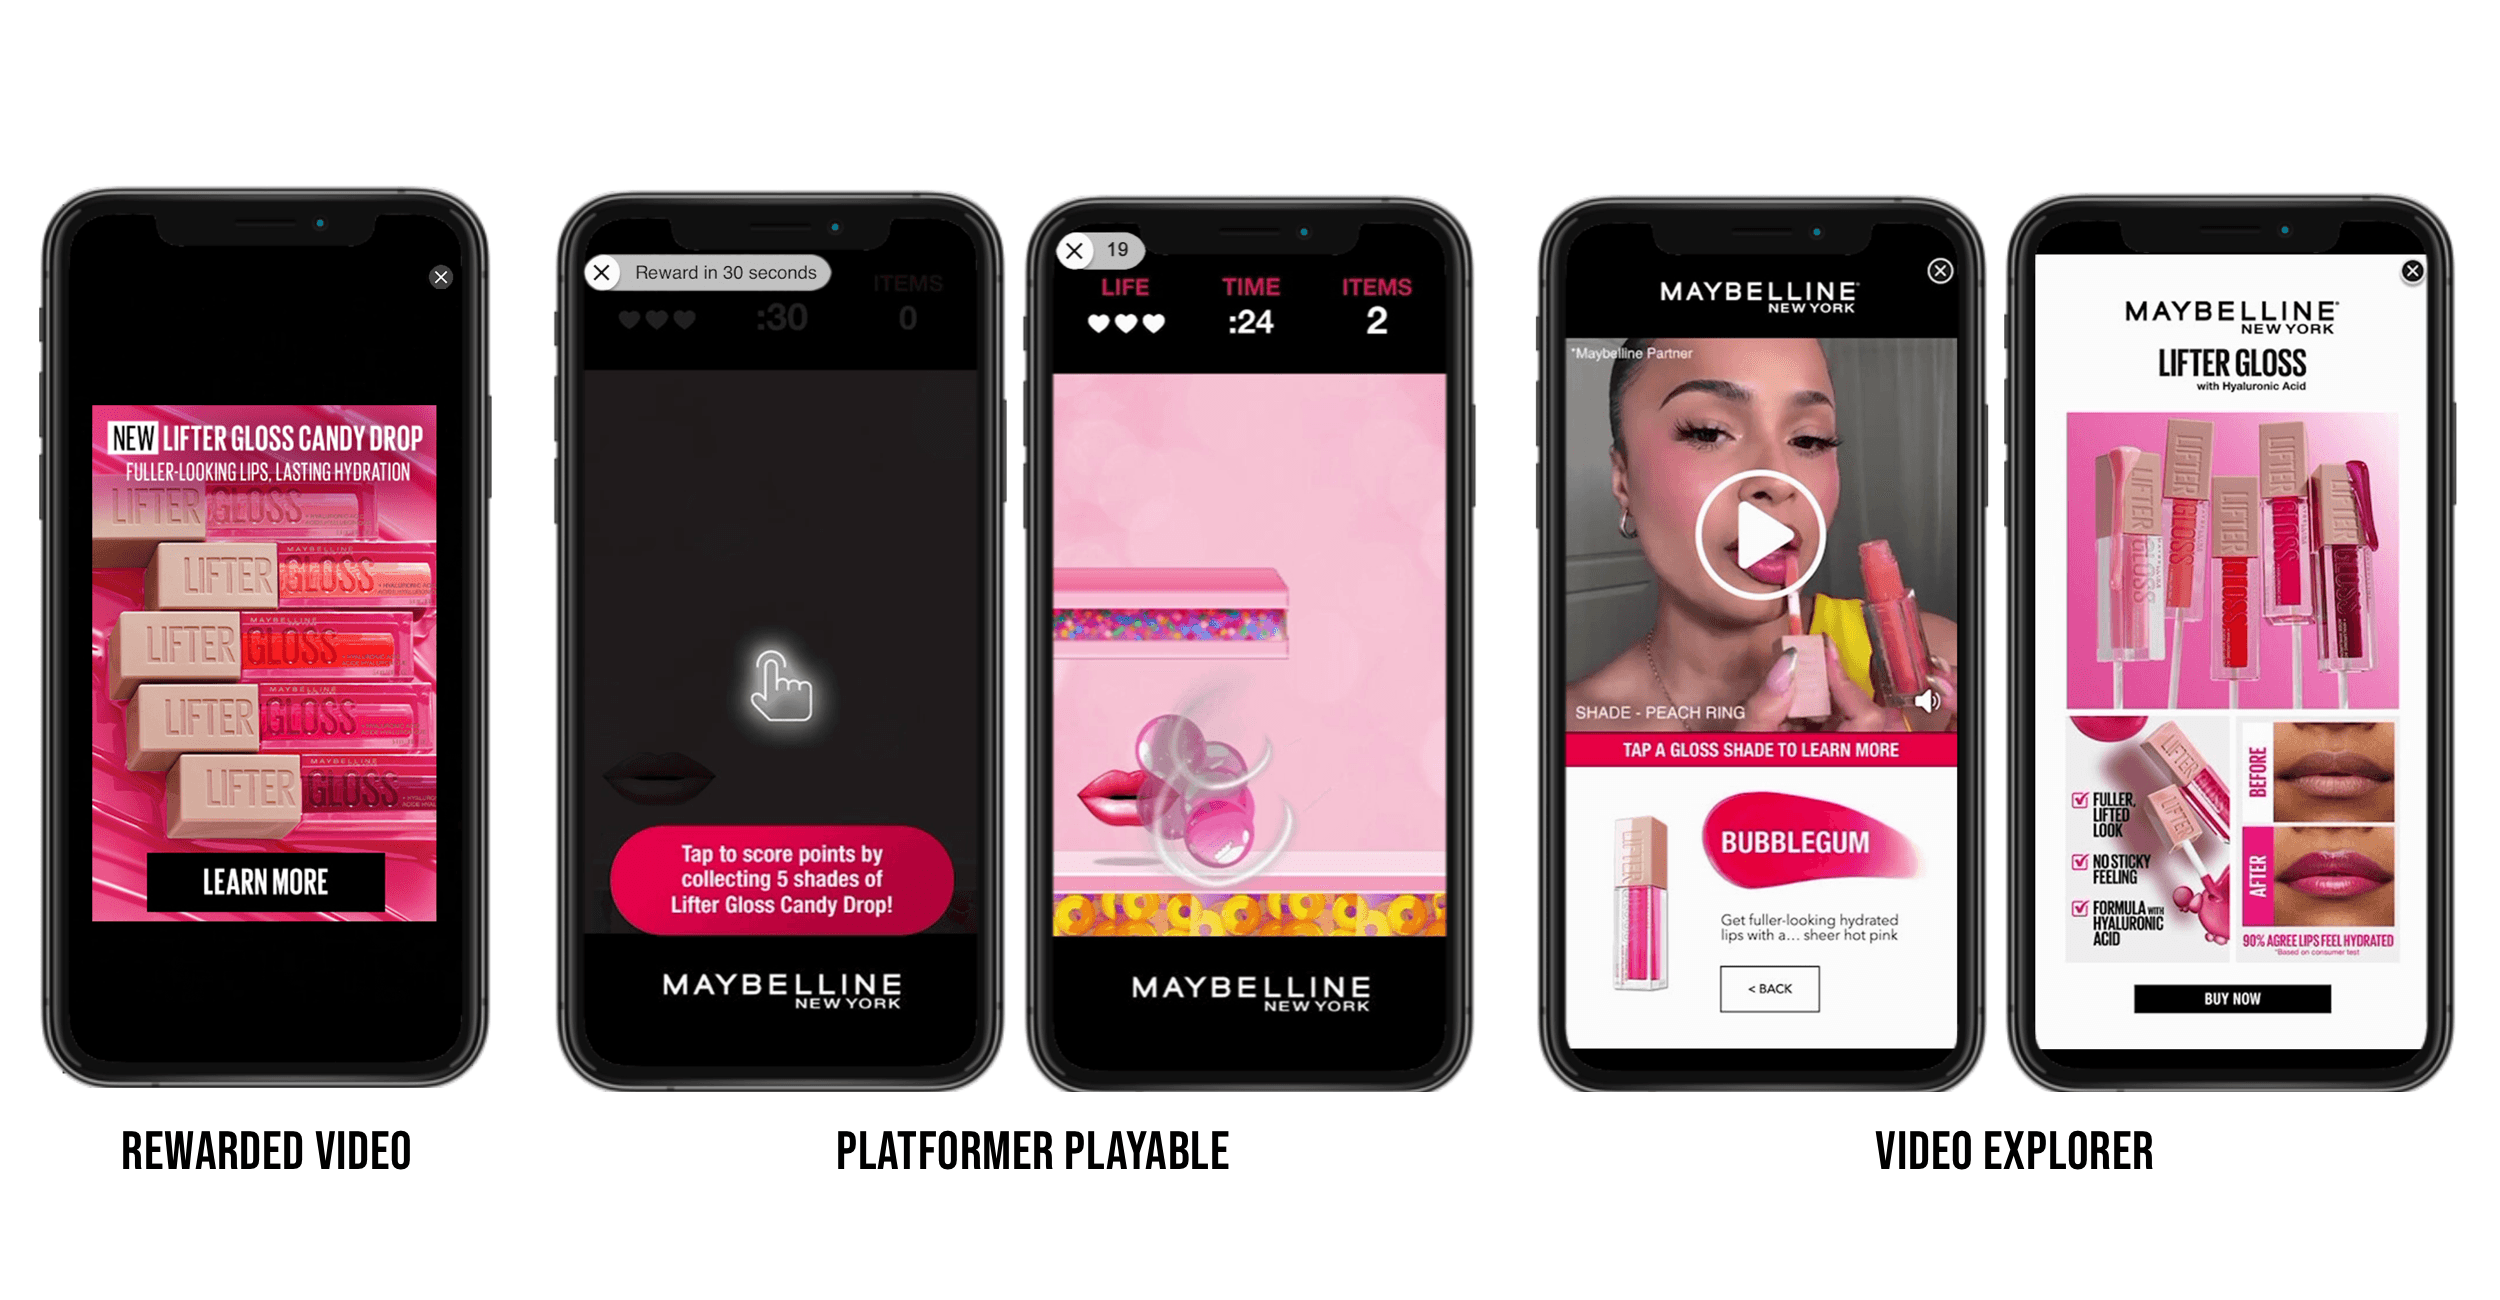 Lifter Gloss Candy Drop Campaign Examples